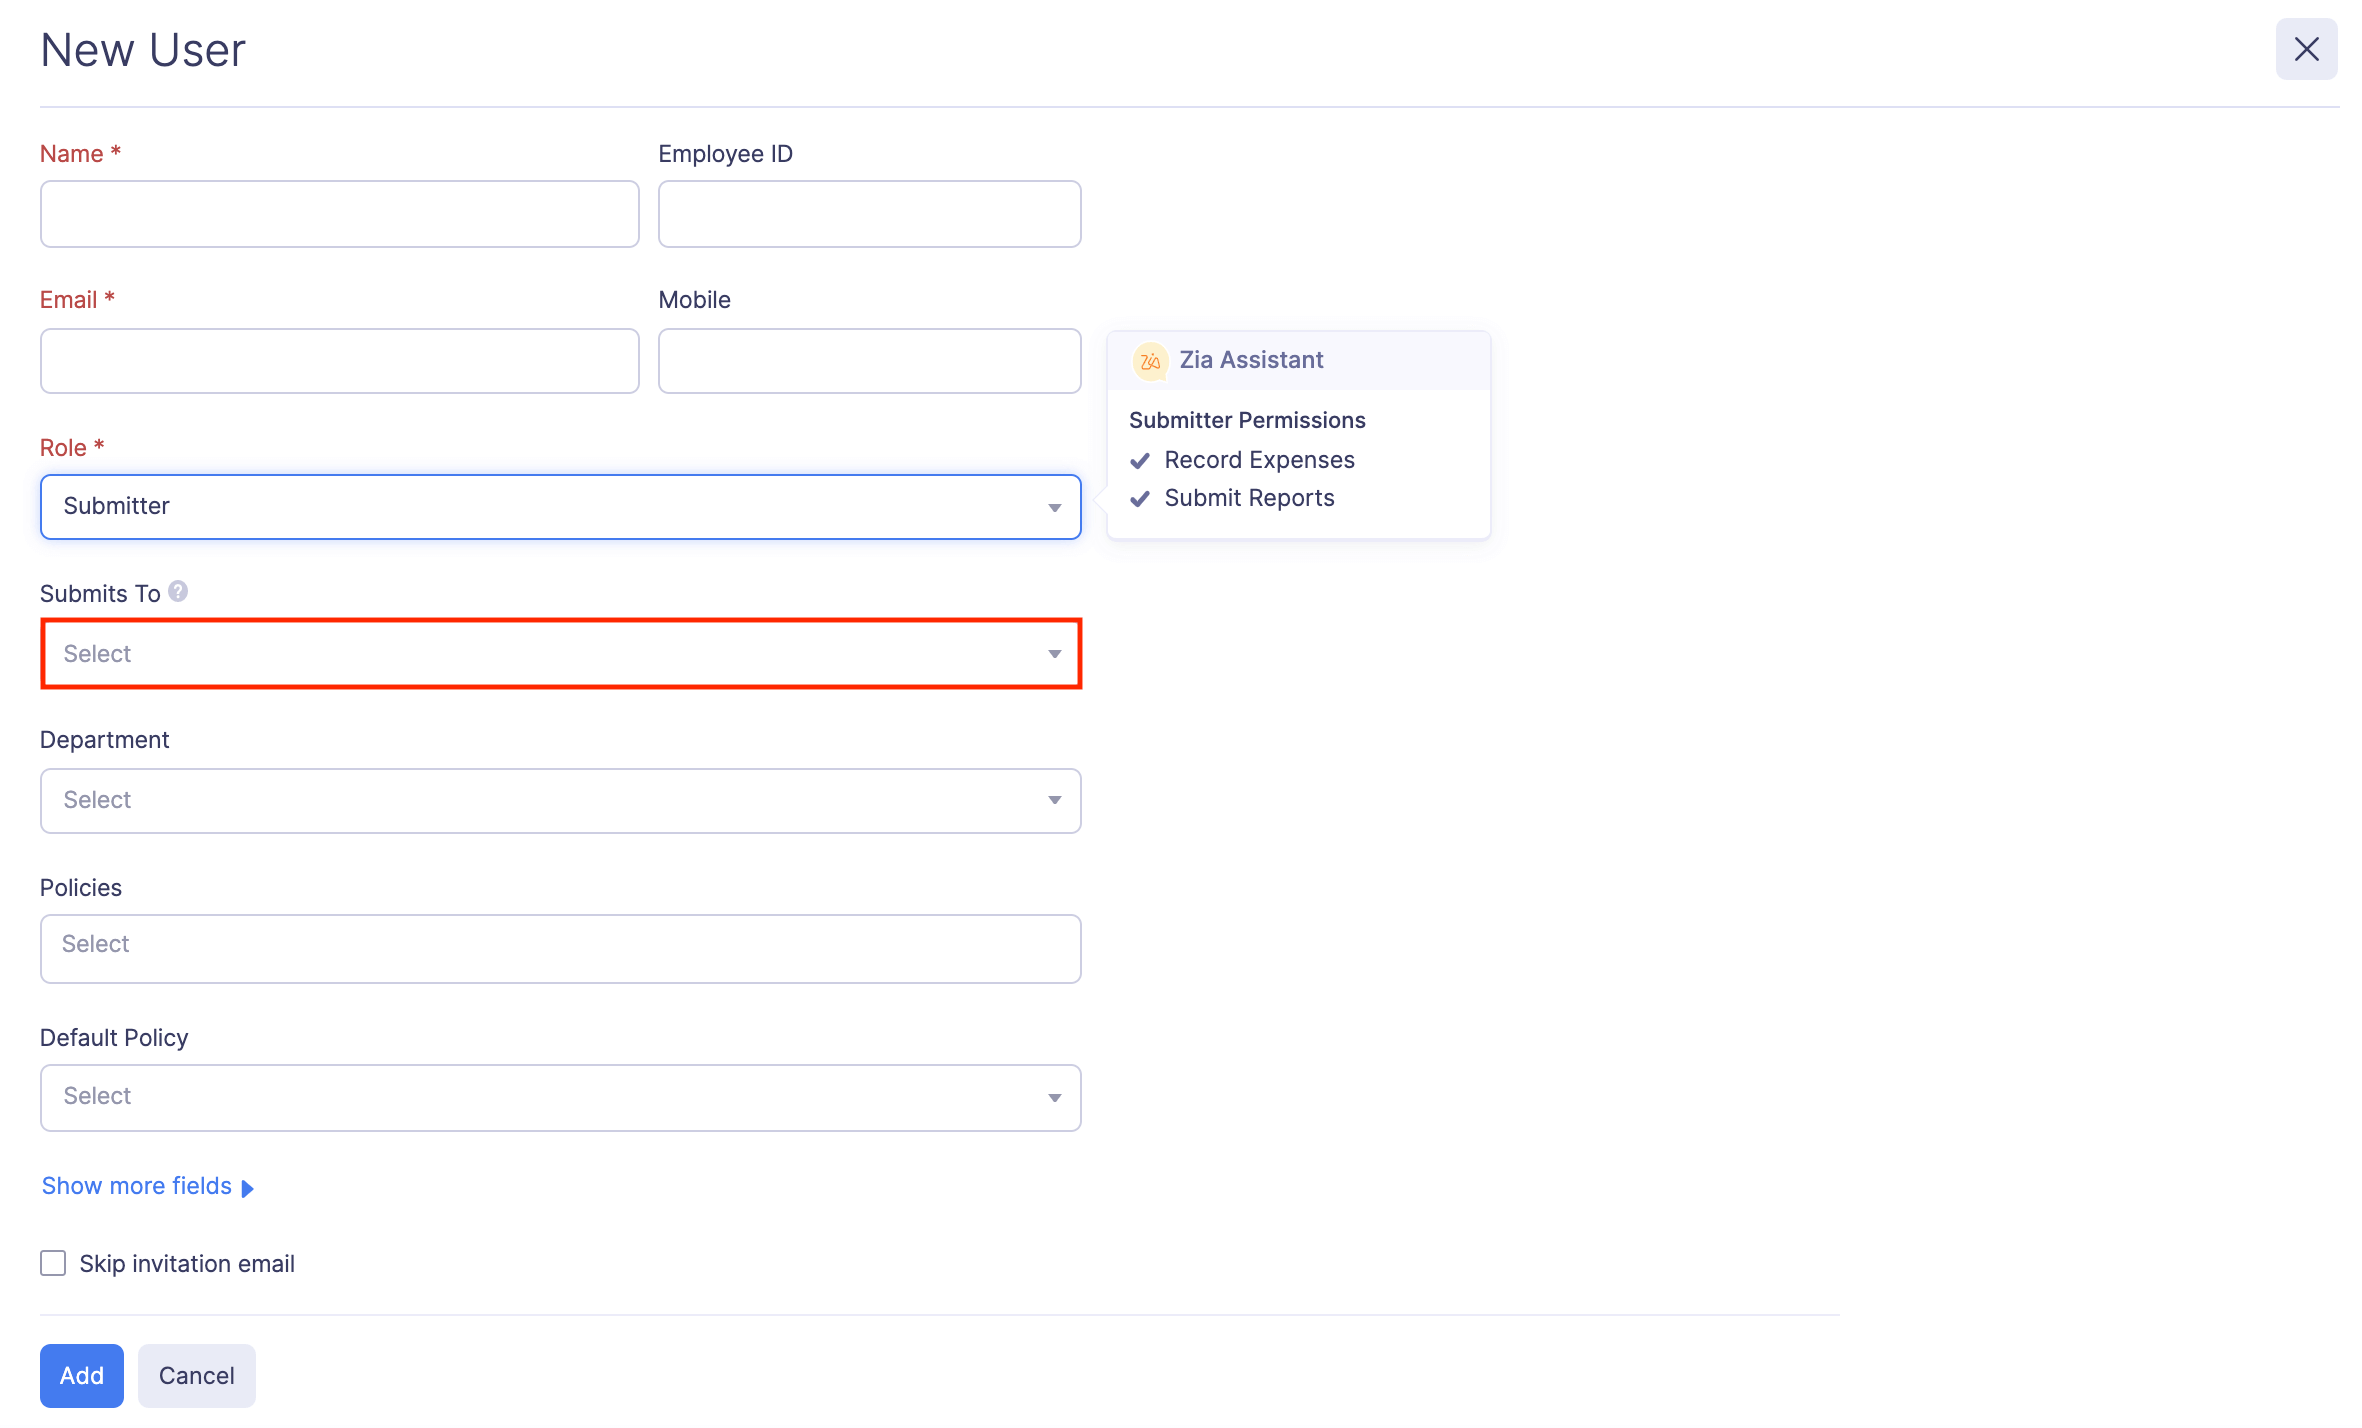 Approval Flow for Submitters